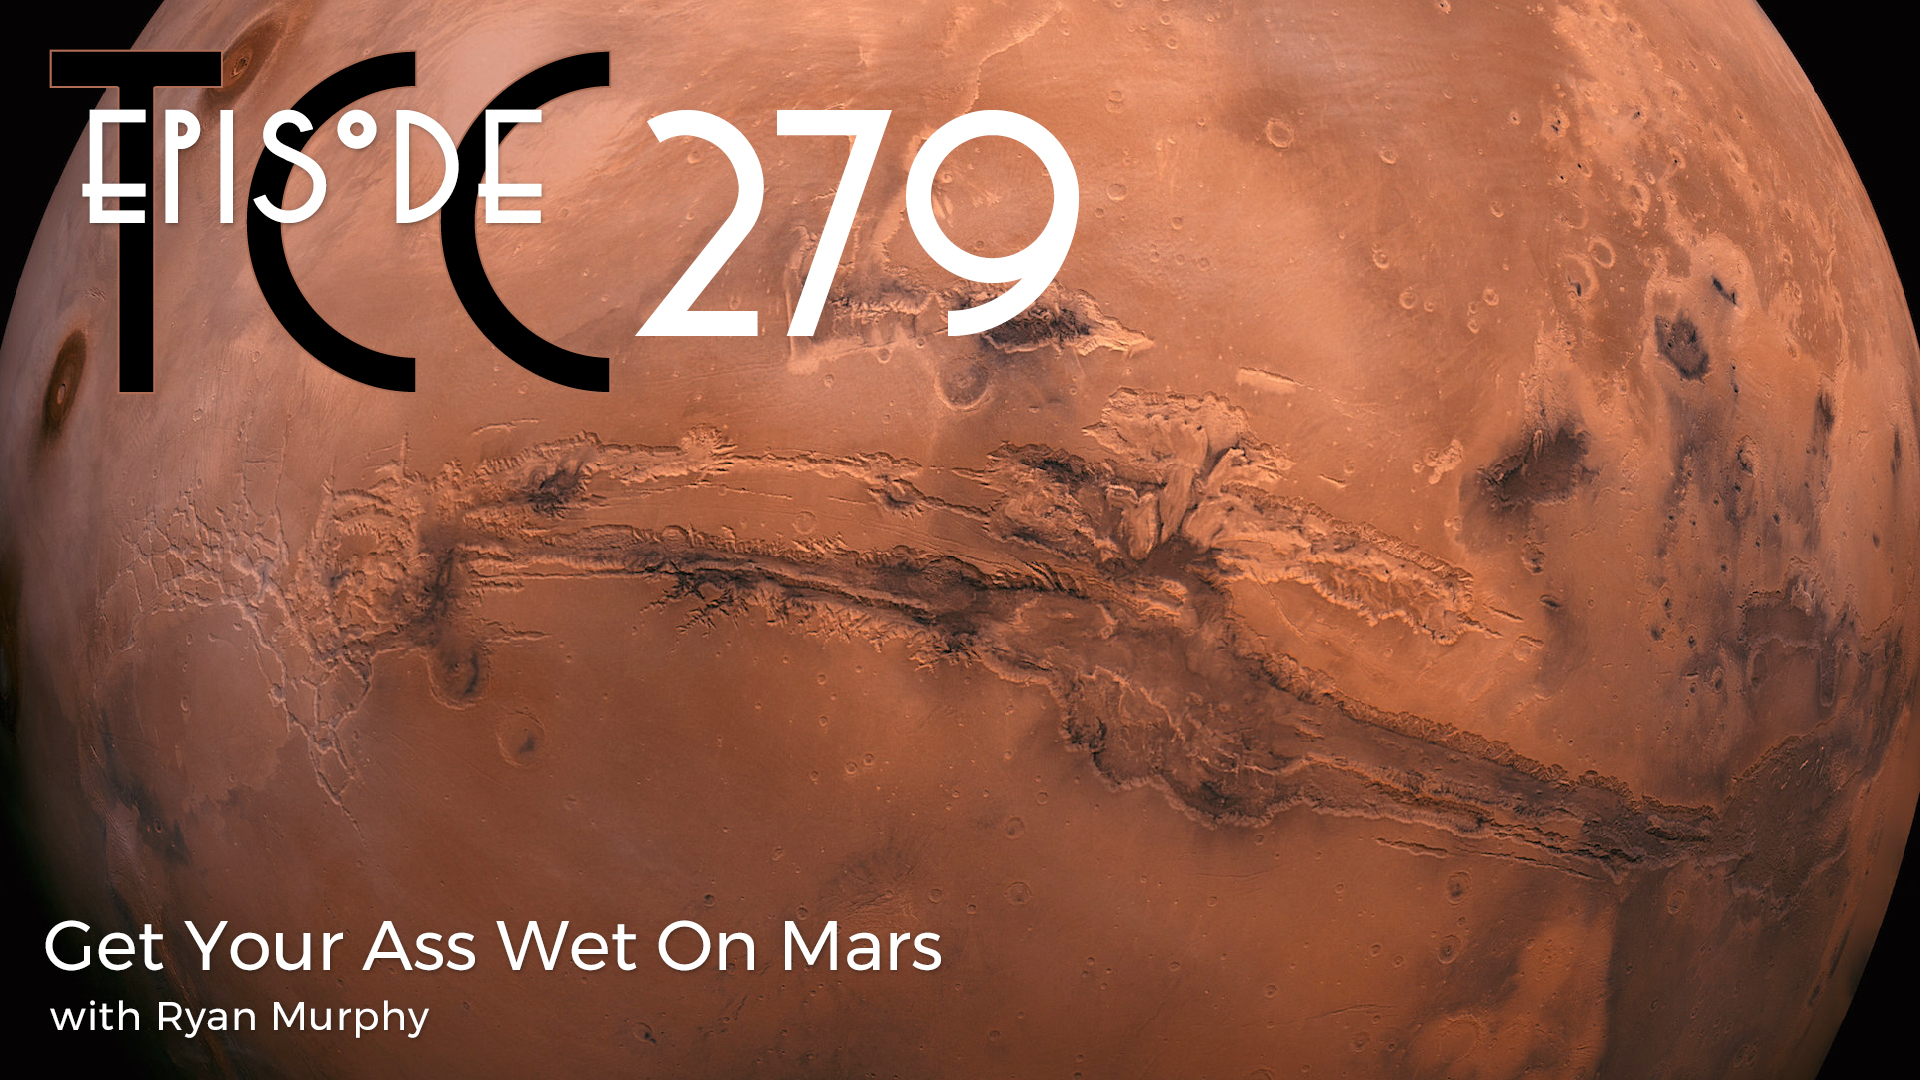 The Citadel Cafe 279: Get Your Ass Wet On Mars